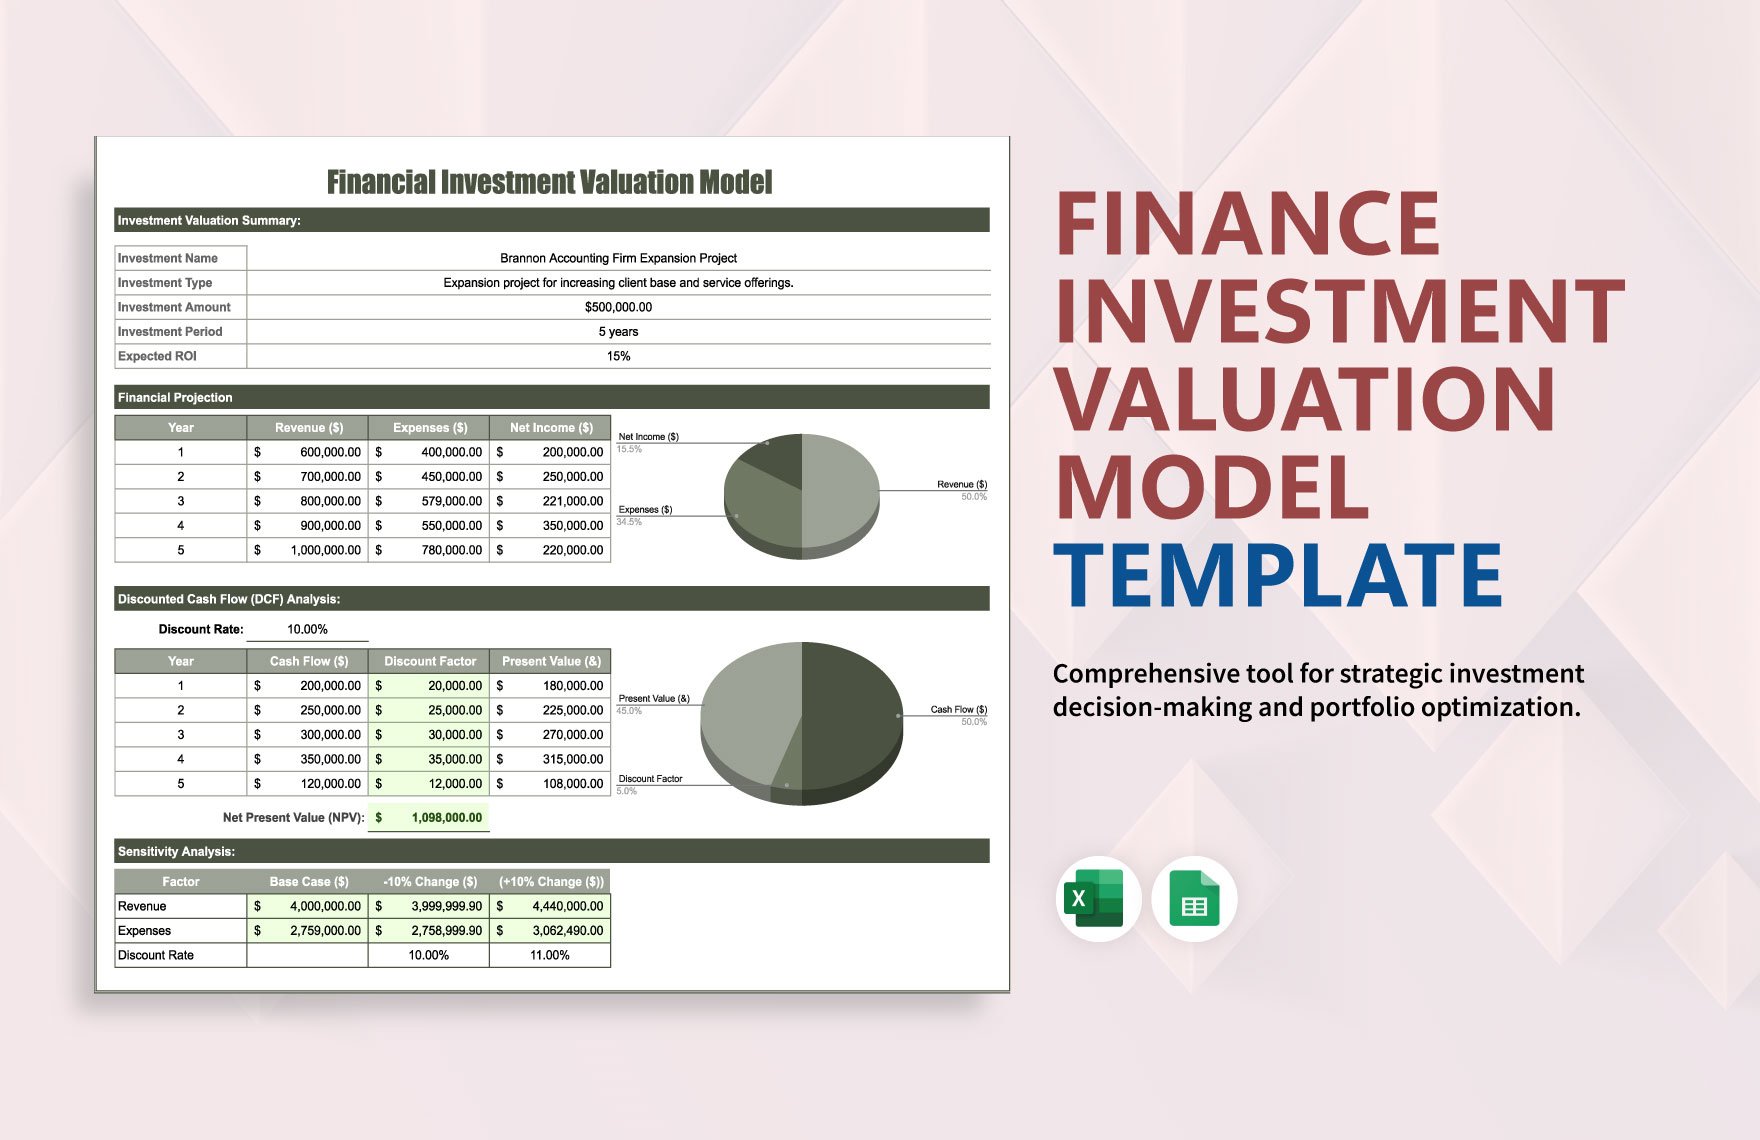 Financial Investment Valuation Model Template in Excel, Google Sheets